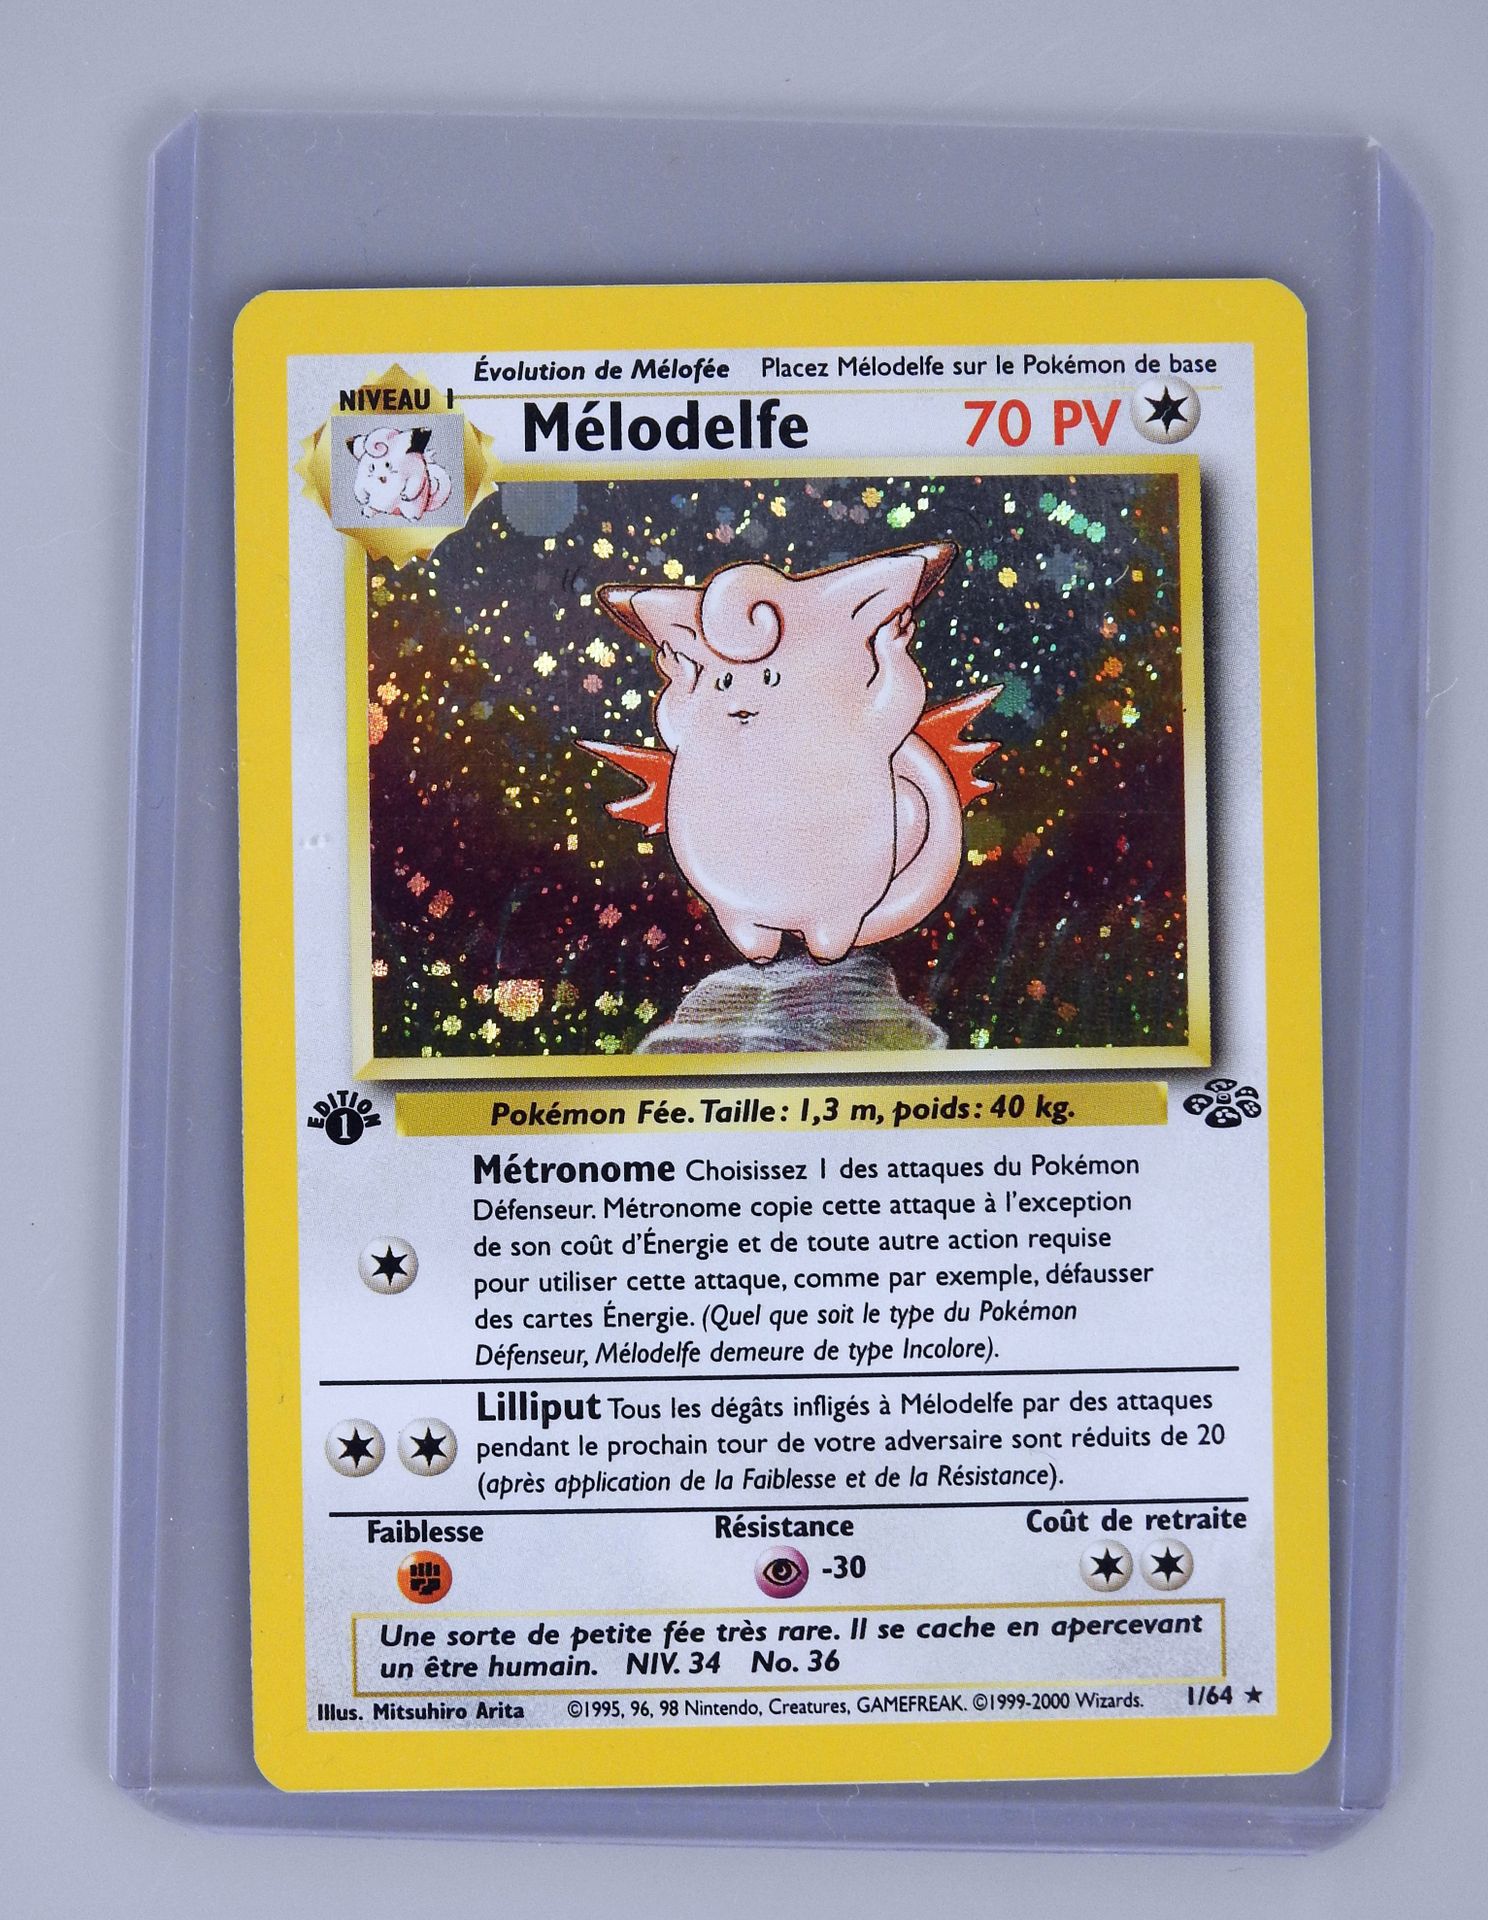 Null MELODELFE Ed 1

Wizards Jungle Block 1/64

Pokemon card in superb condition